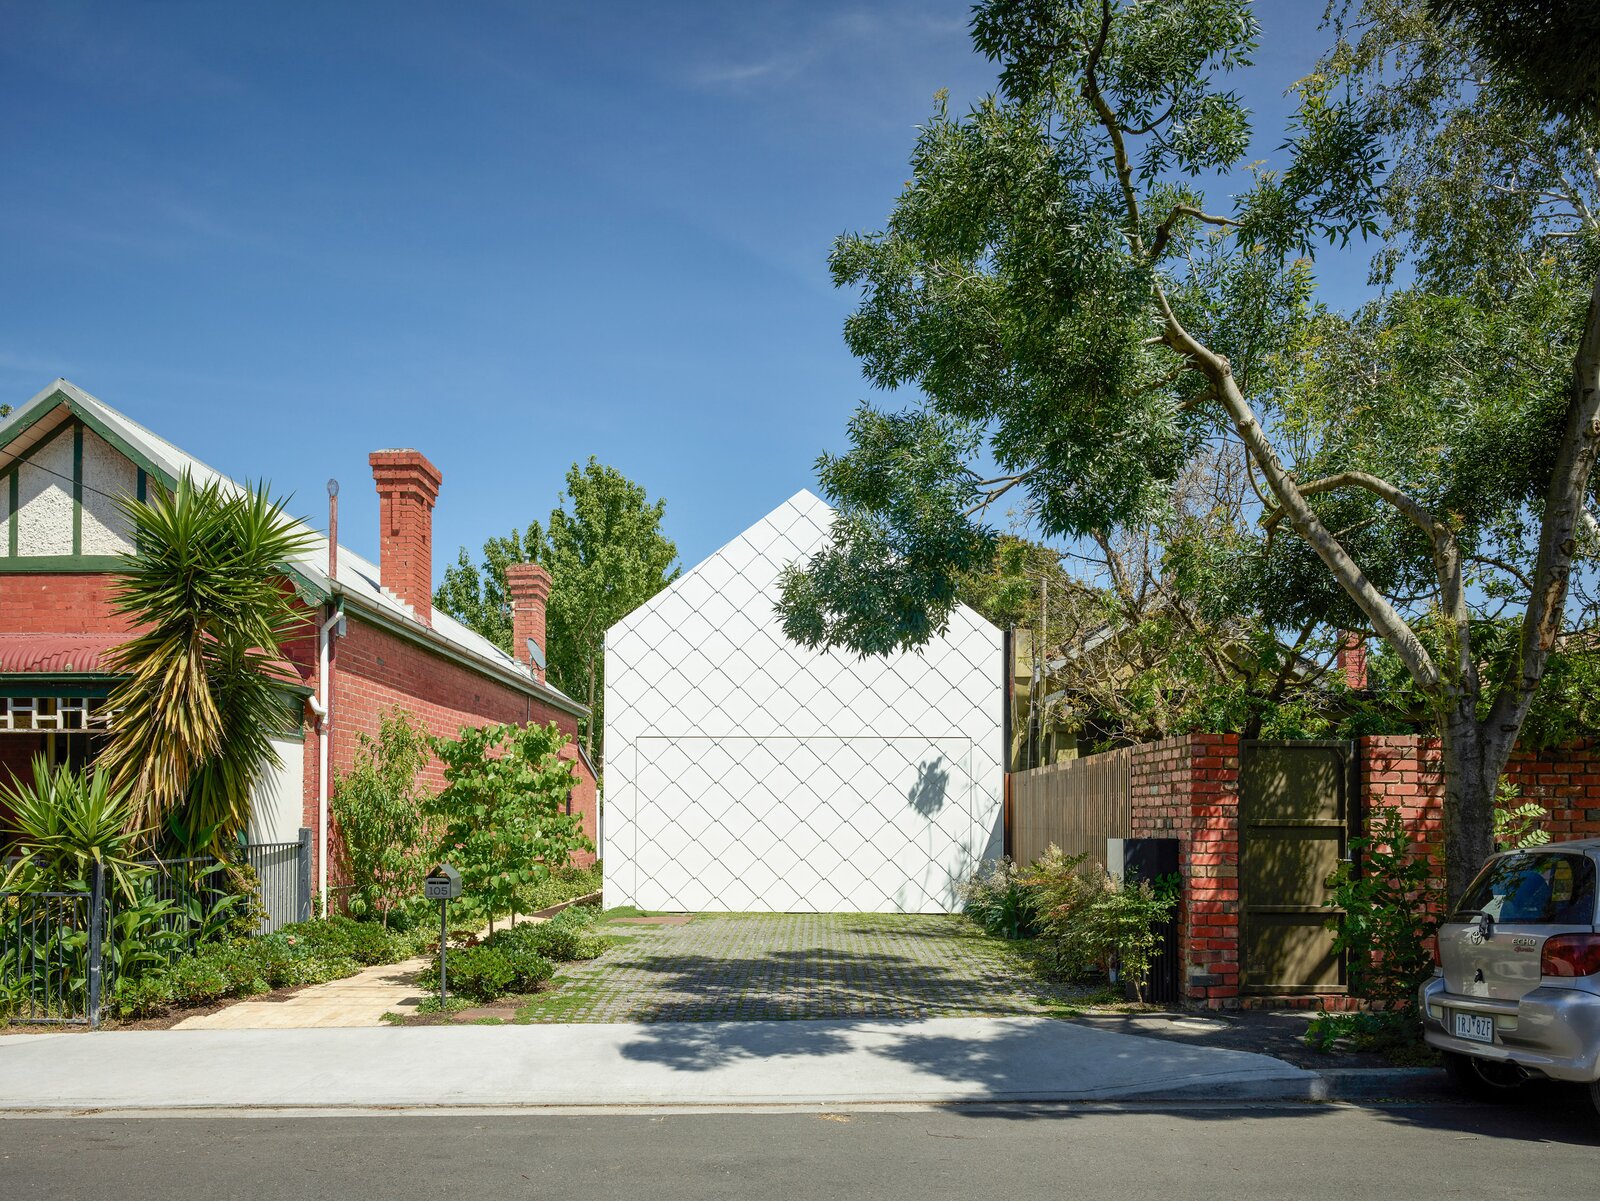 This High-Tech Melbourne Home Generates “Way More” Energy Than It Uses